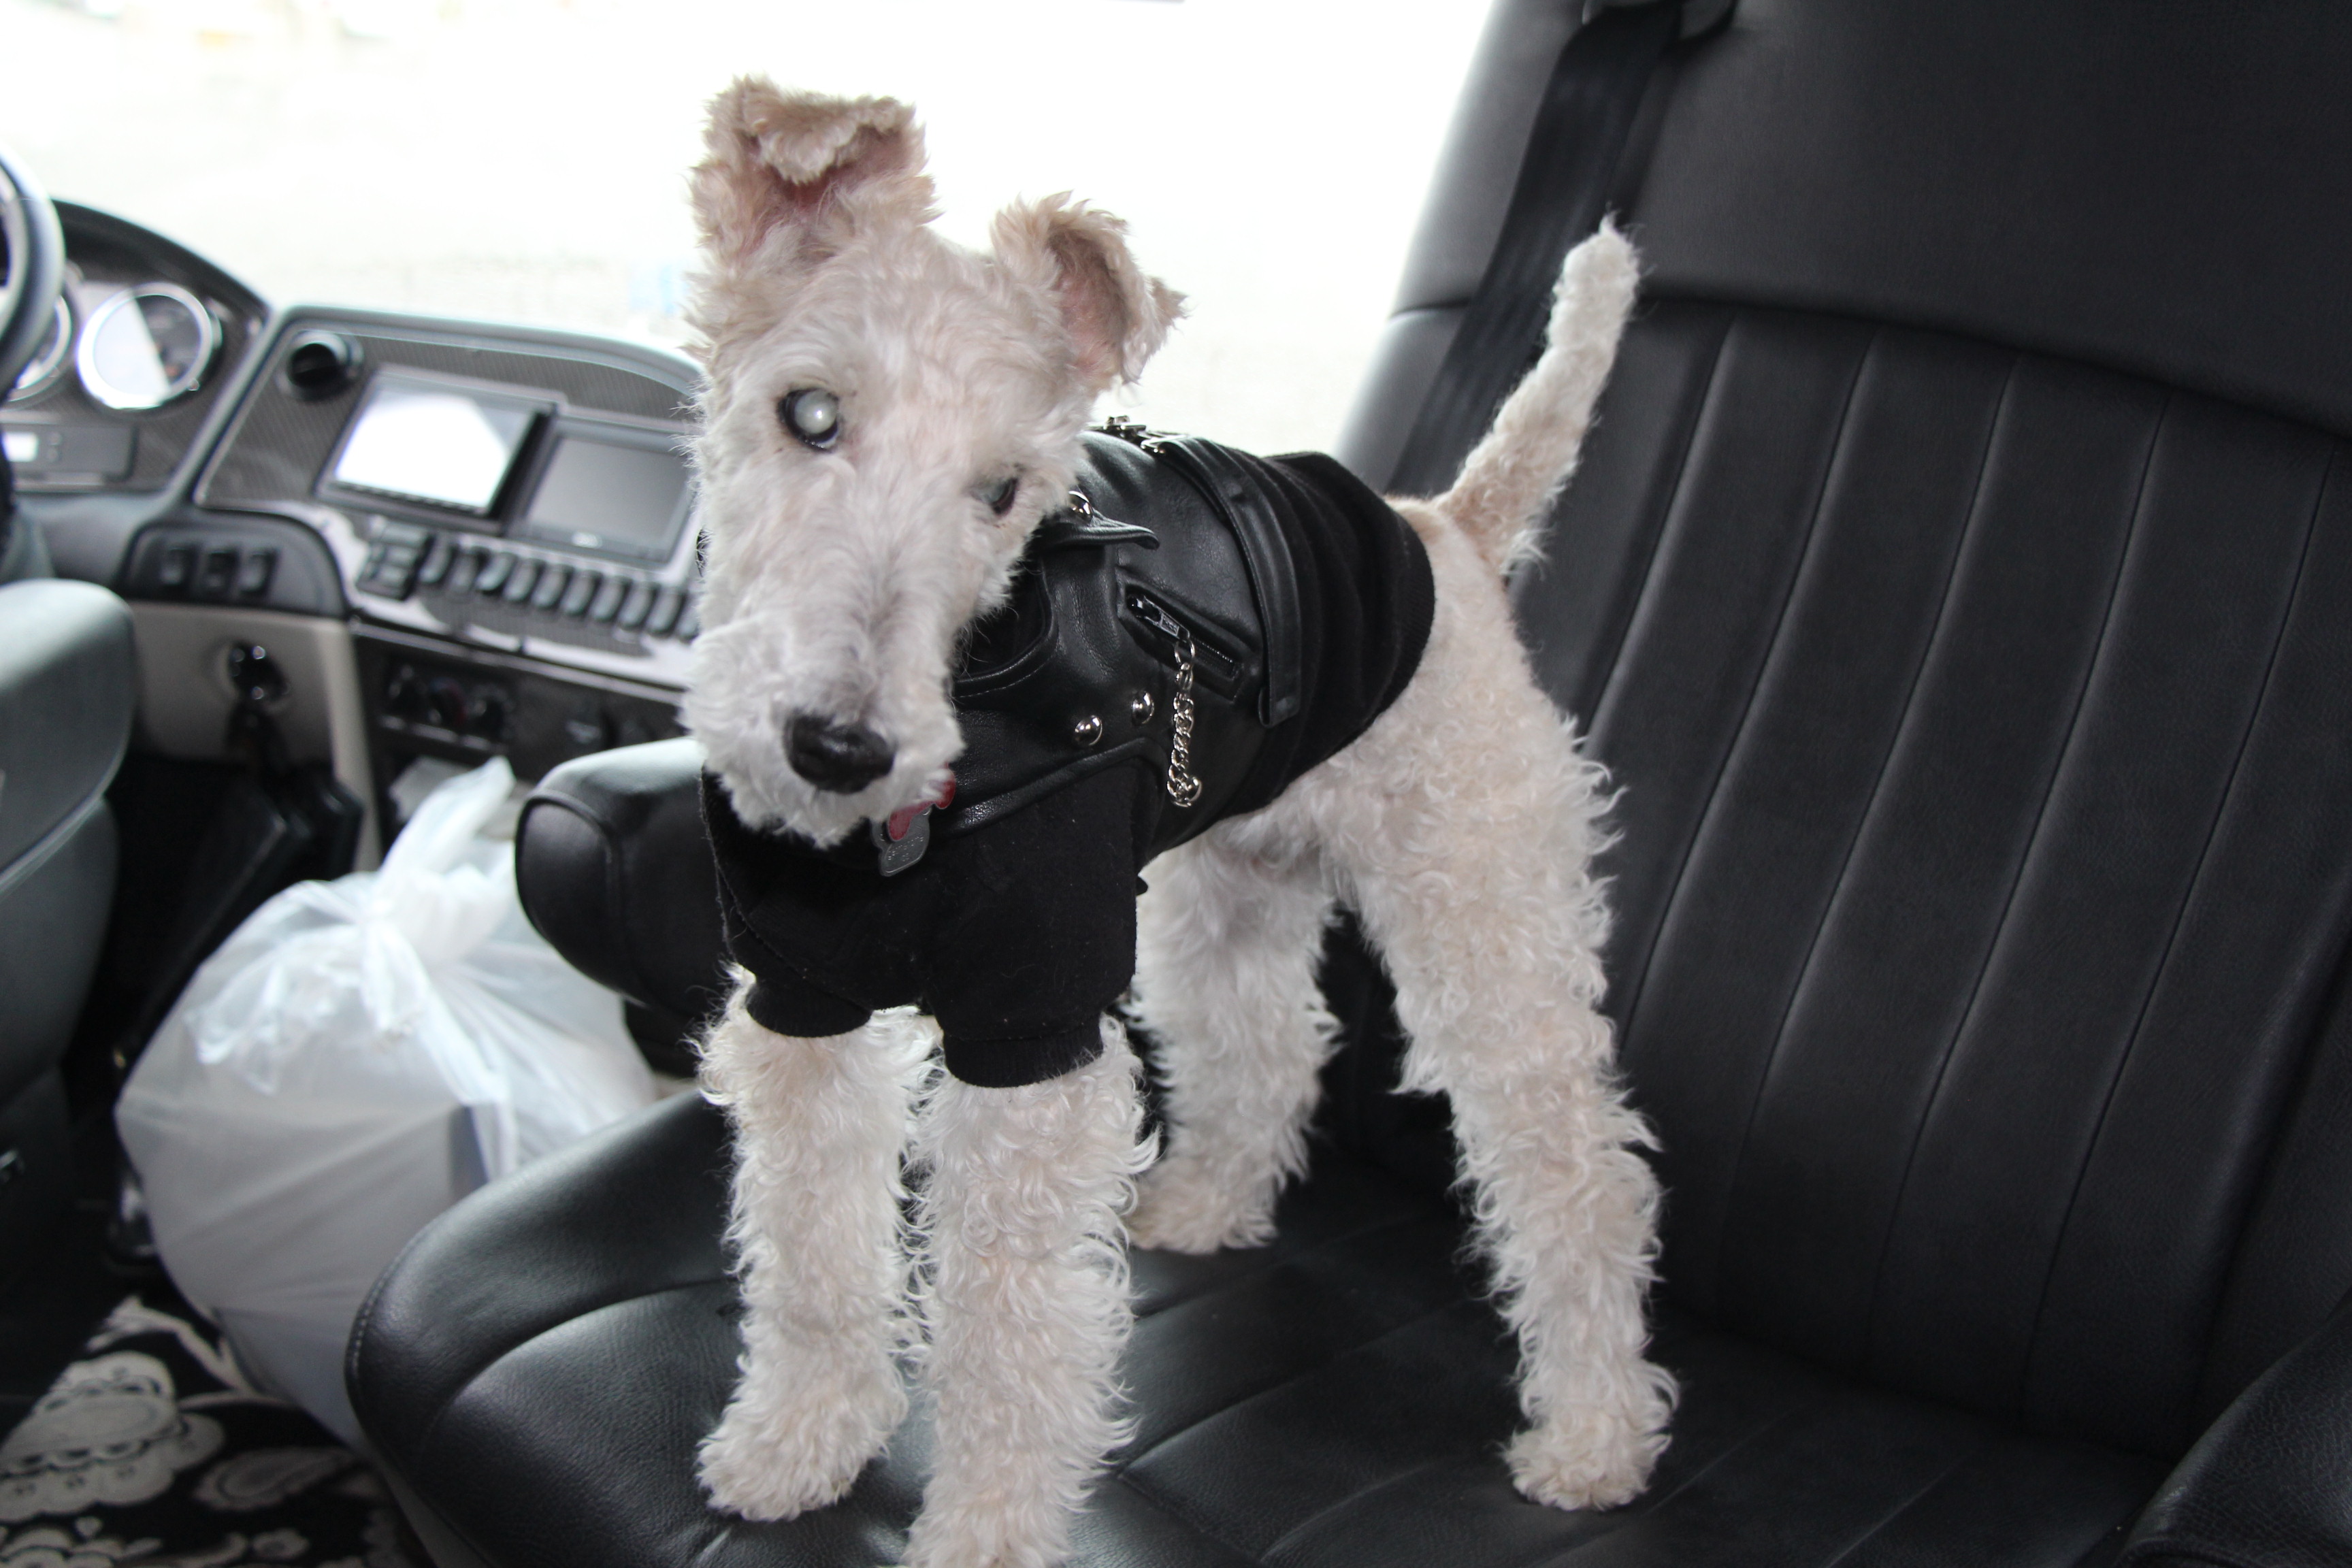 A white dog in a leather outfit sitting on a seat.